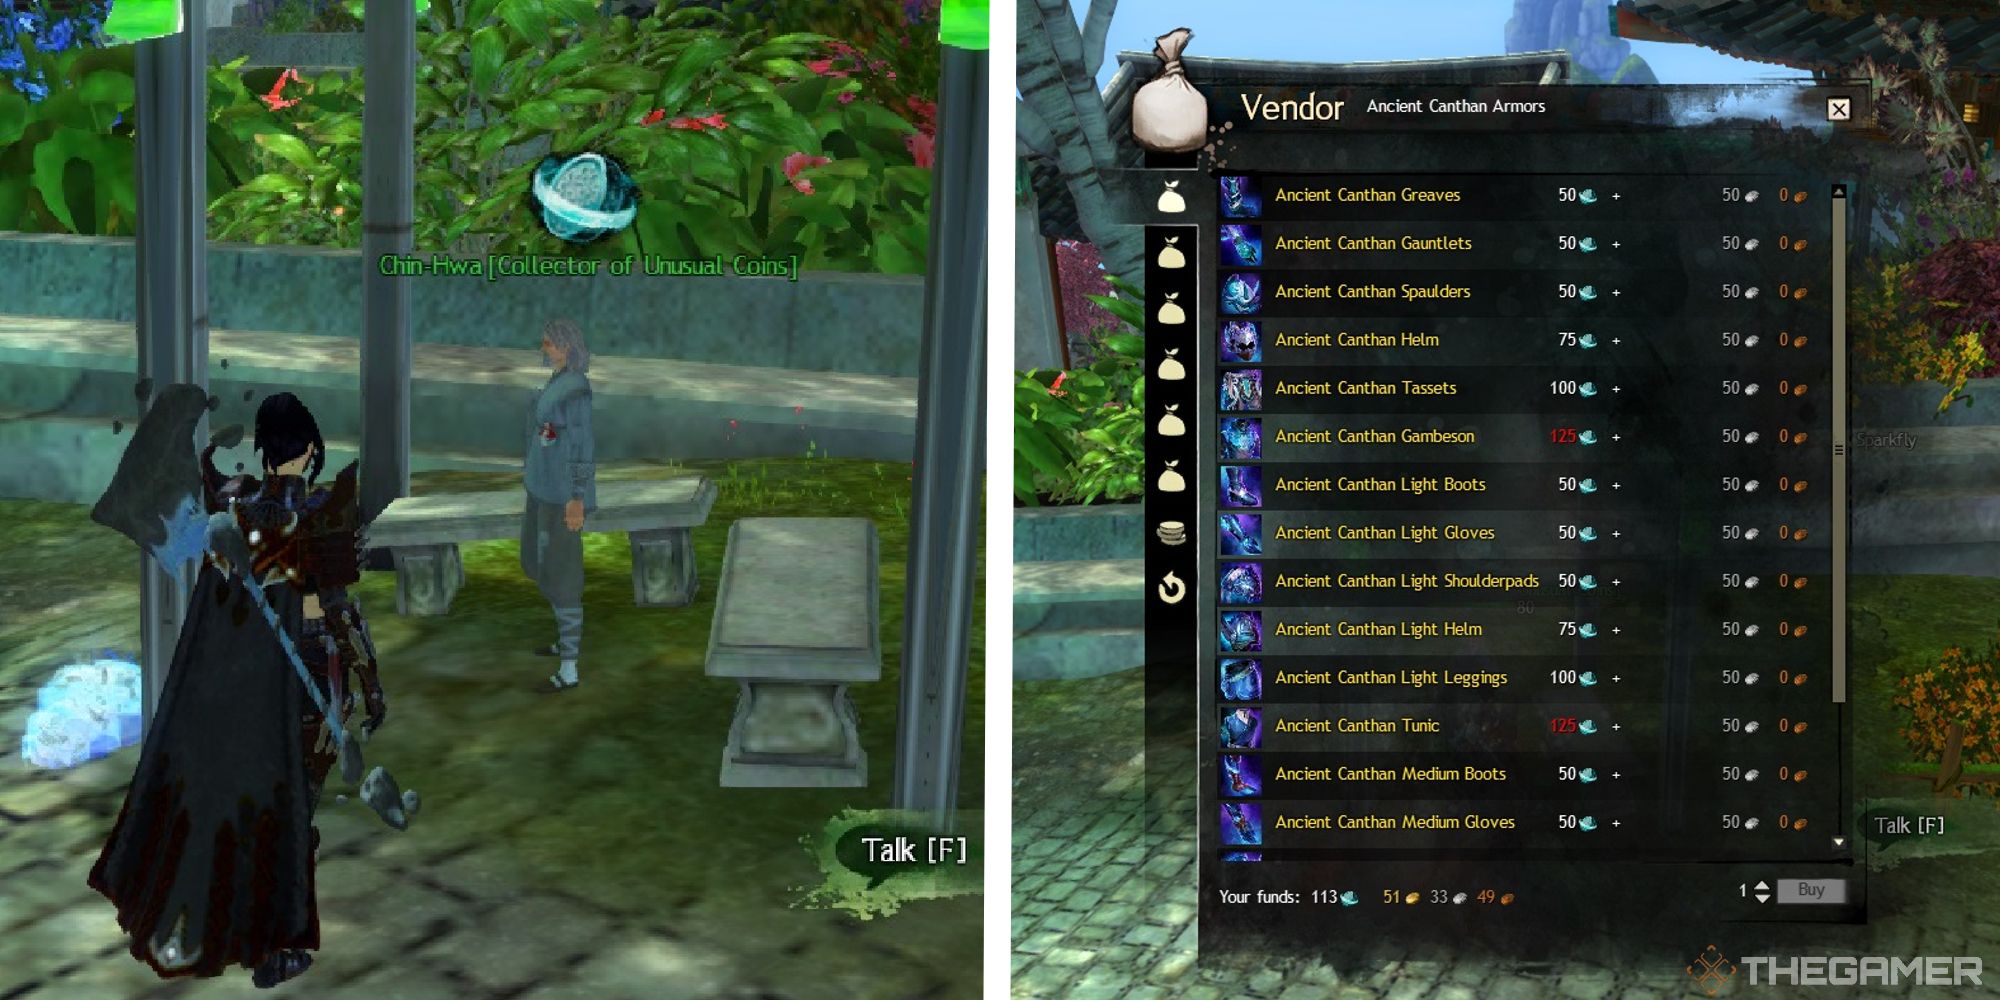 image of player standing next to chin-hwa next to image of vendor panel